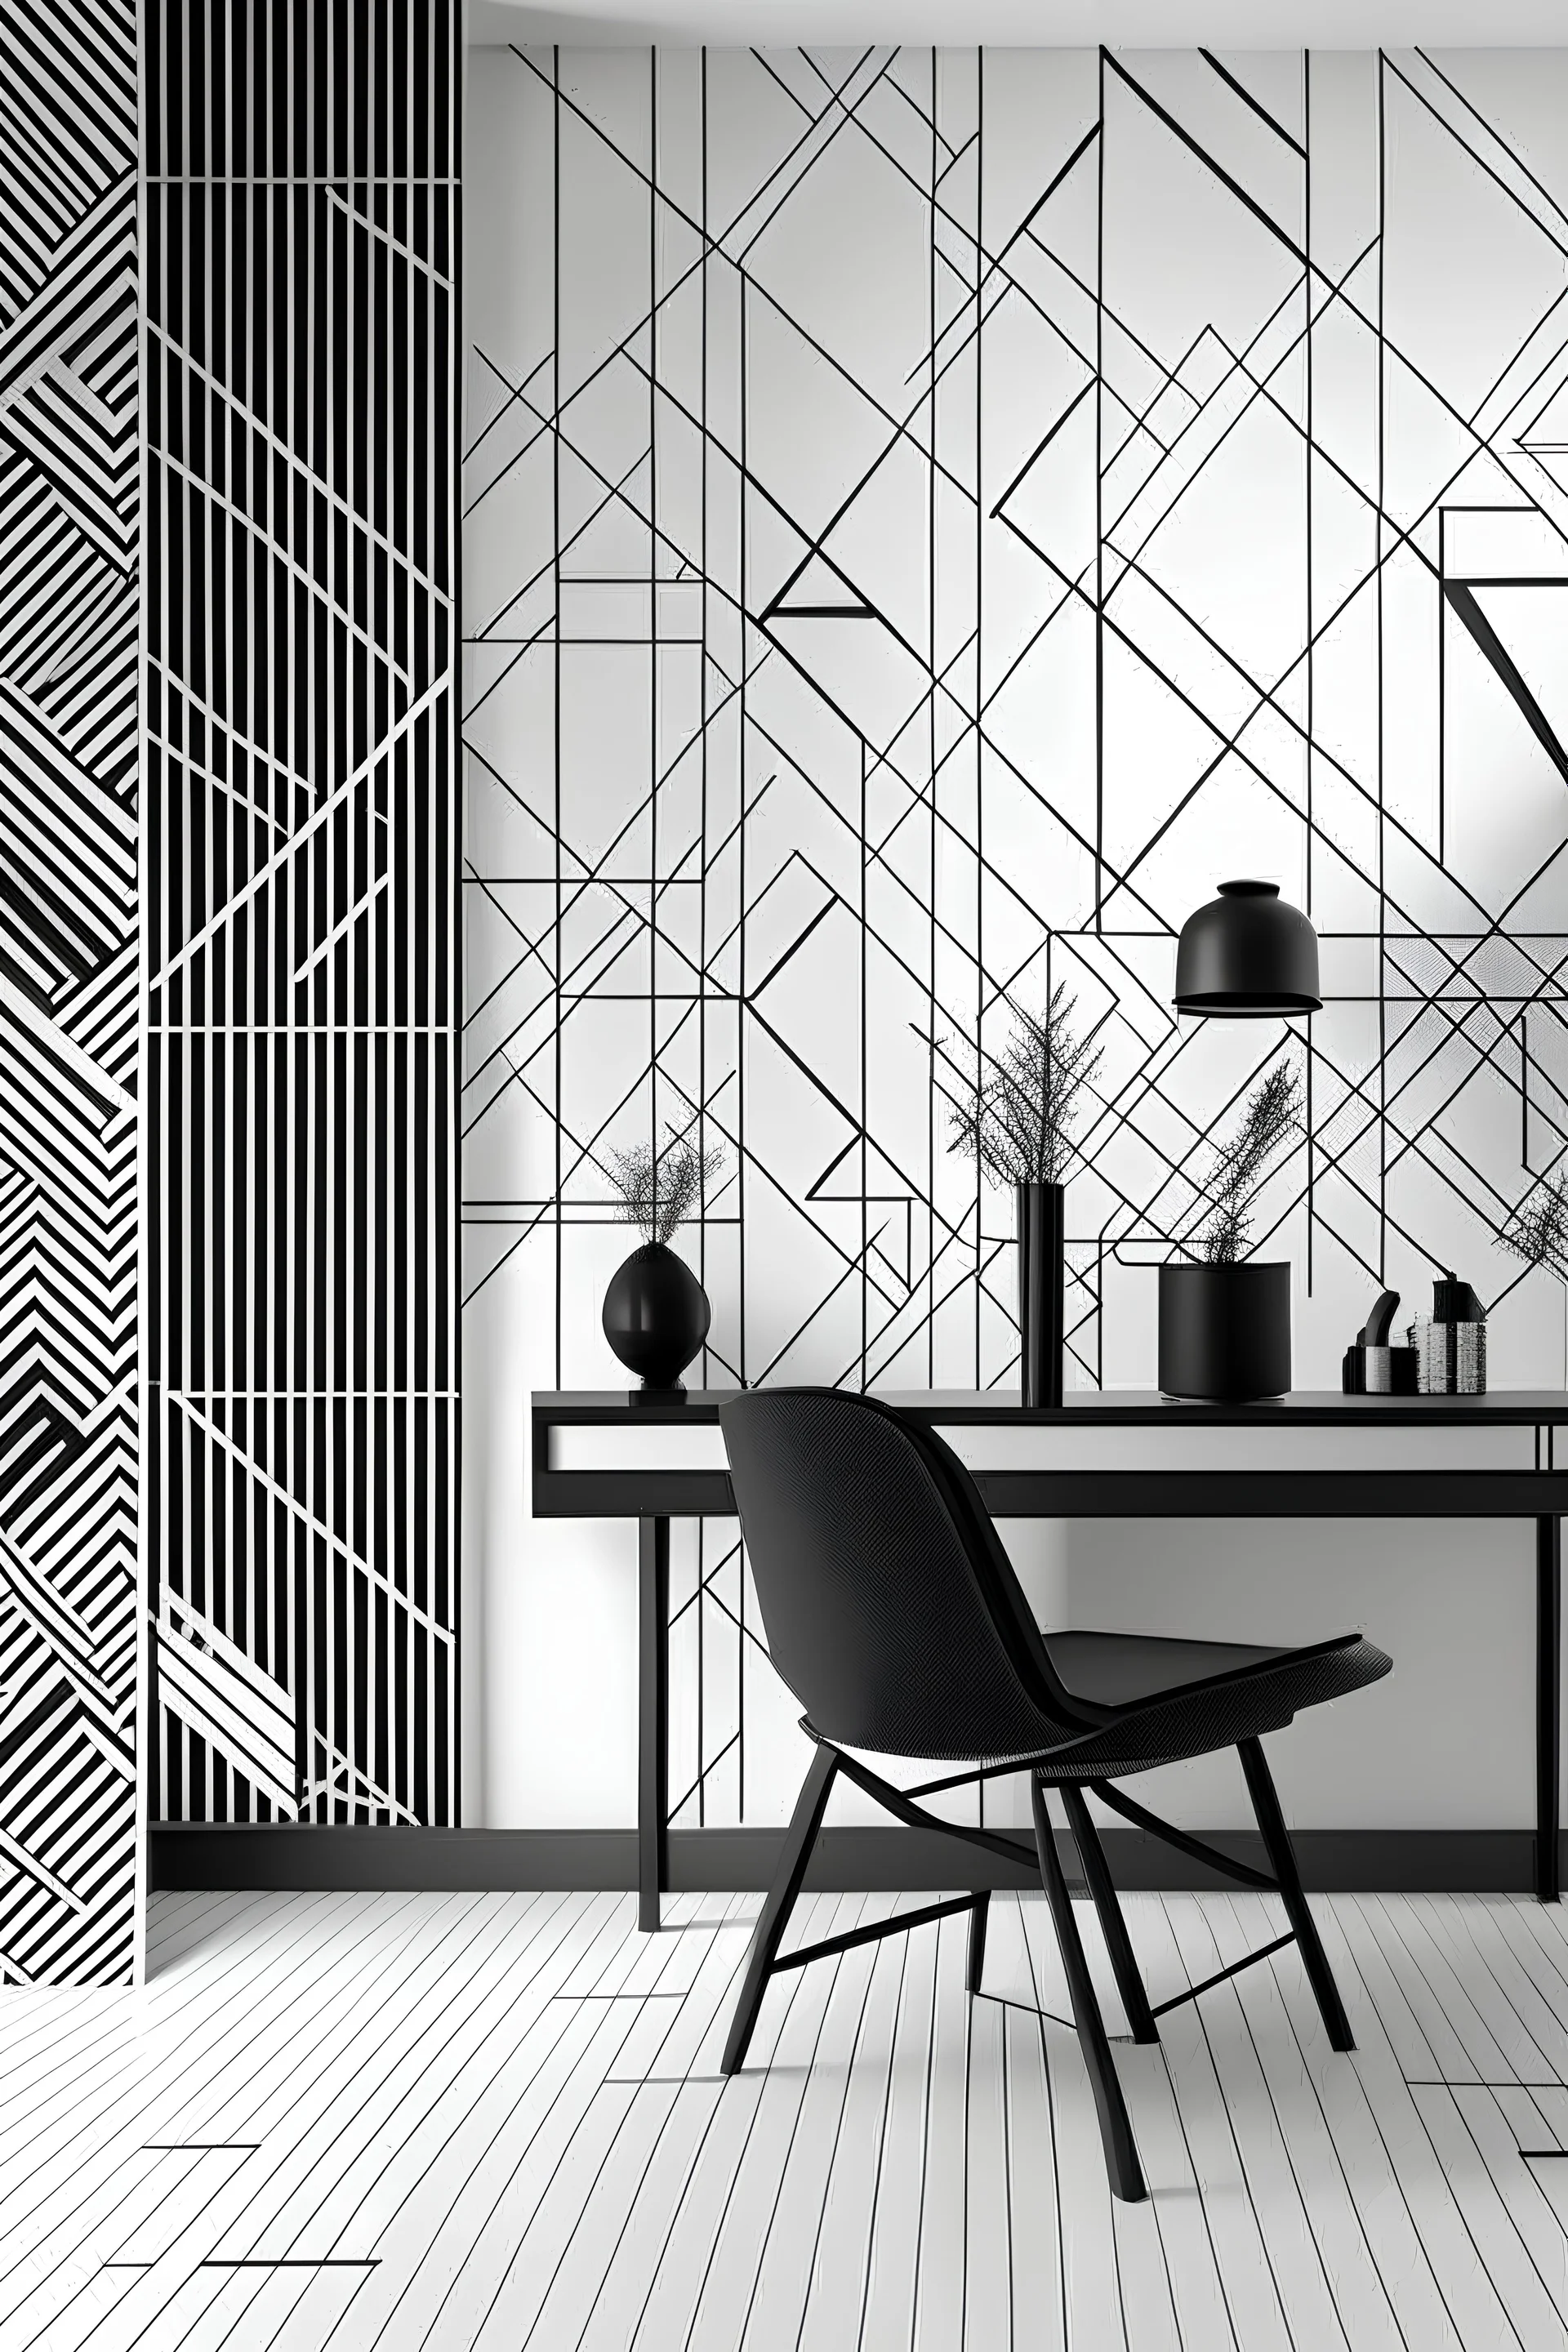 Create handpainted wall mural with intersecting grids and geometric shapes in black and white, capturing the essence of Swiss Design with a focus on clean lines and simplicity.